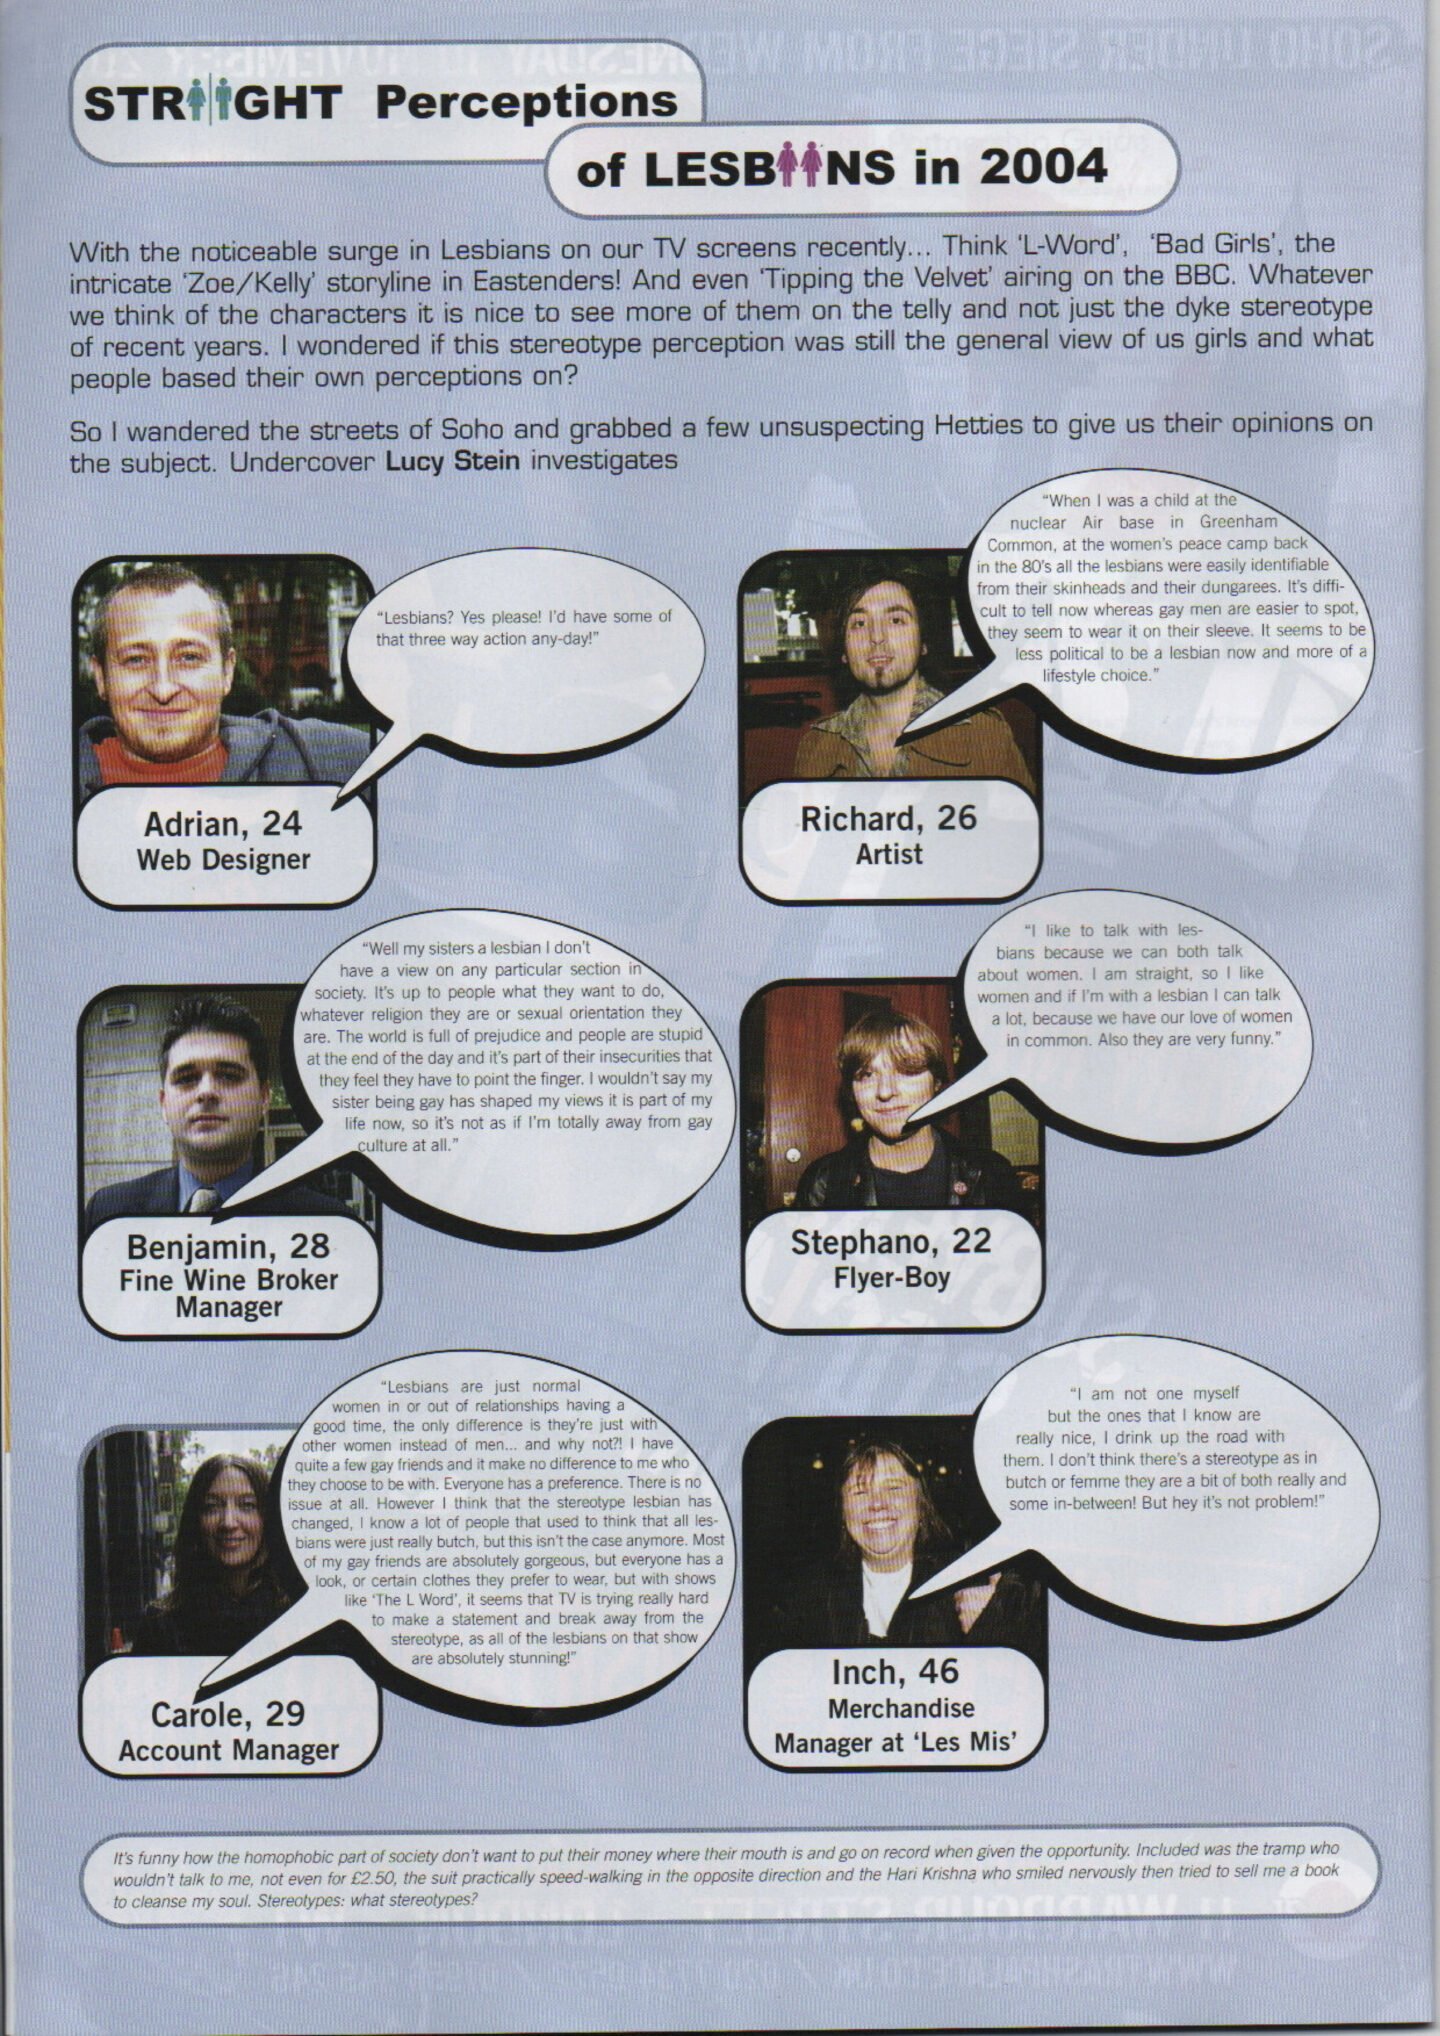 2004 y2k section of g3 asking strangers their perceptions of lesbians. The image gives 6 different opinions. 